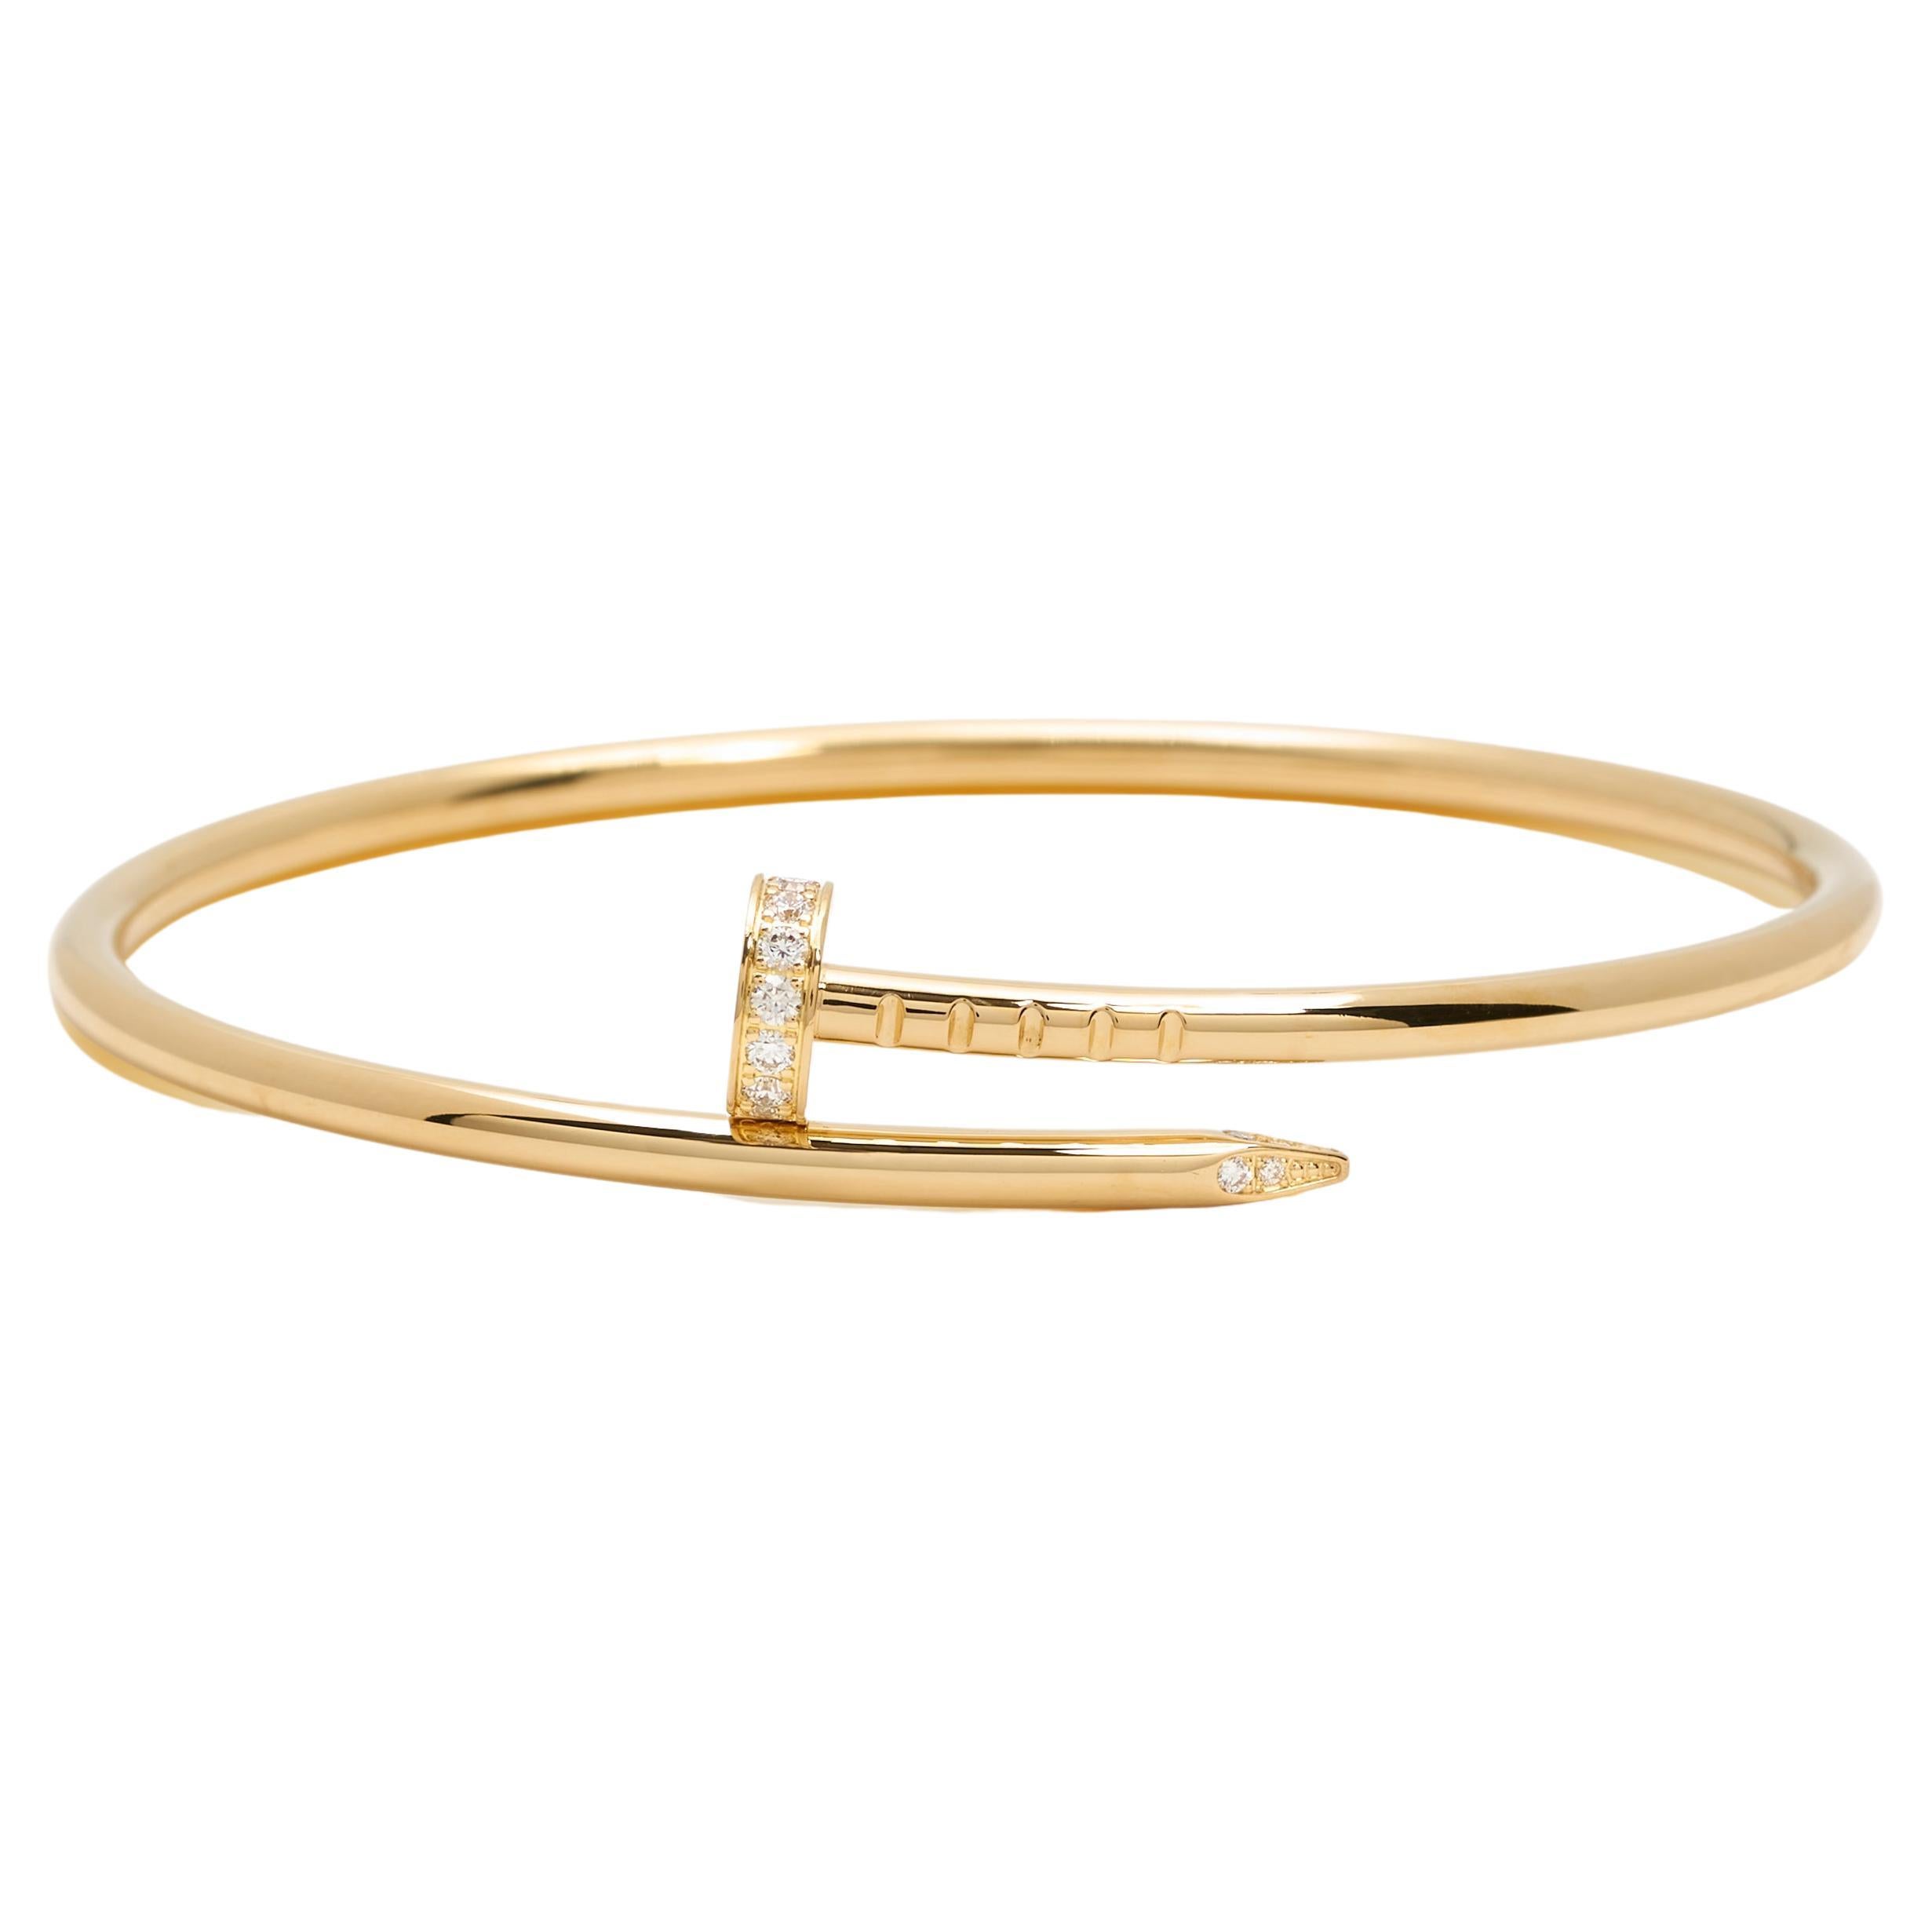 Cartier Juste Un Clou Yellow Gold and Diamond Bracelet, Small Model at ...